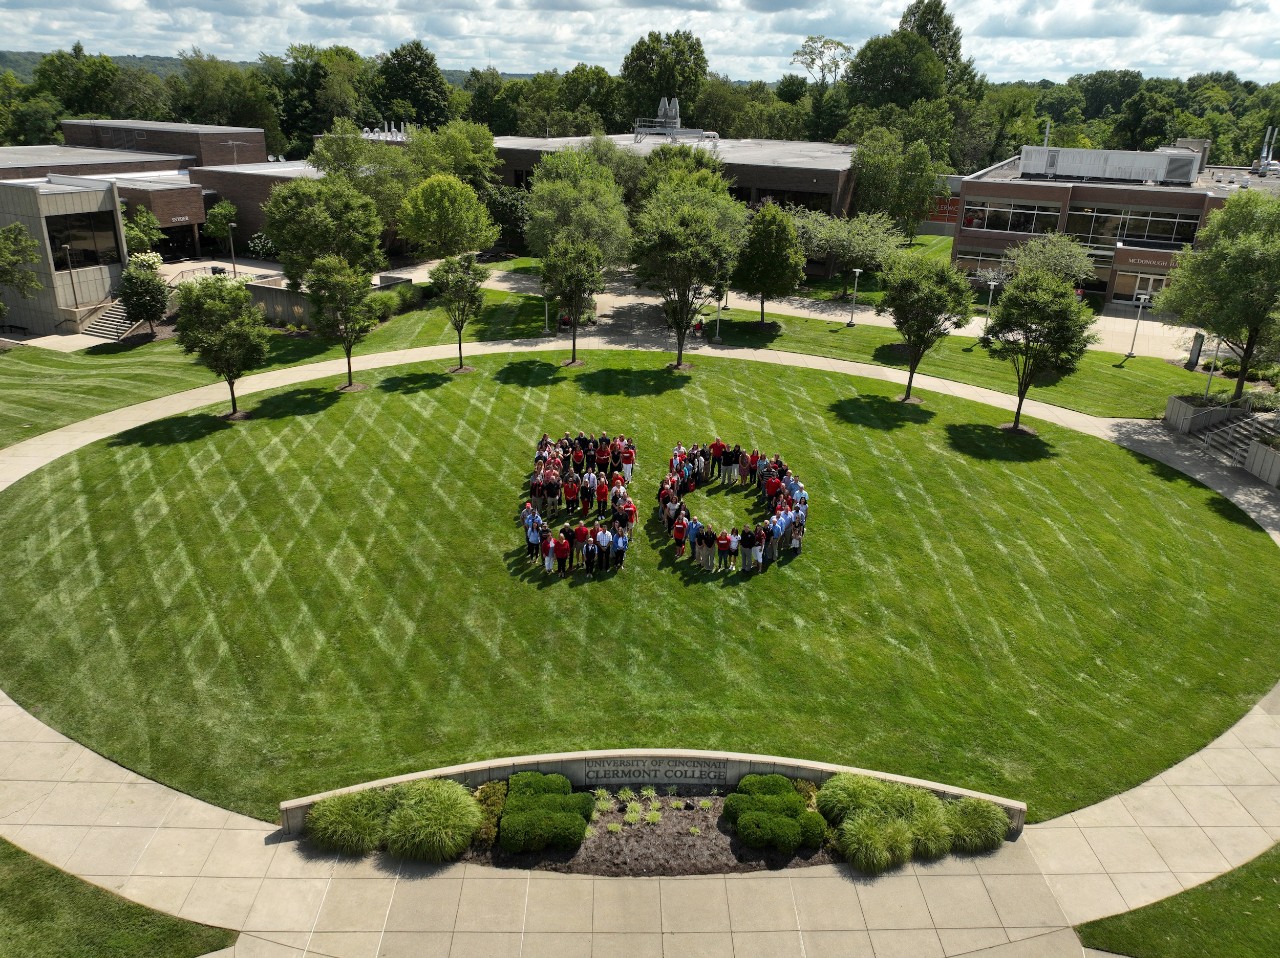 UC Clermont faculty and staff stand in the shape of a "50" on the college campus green